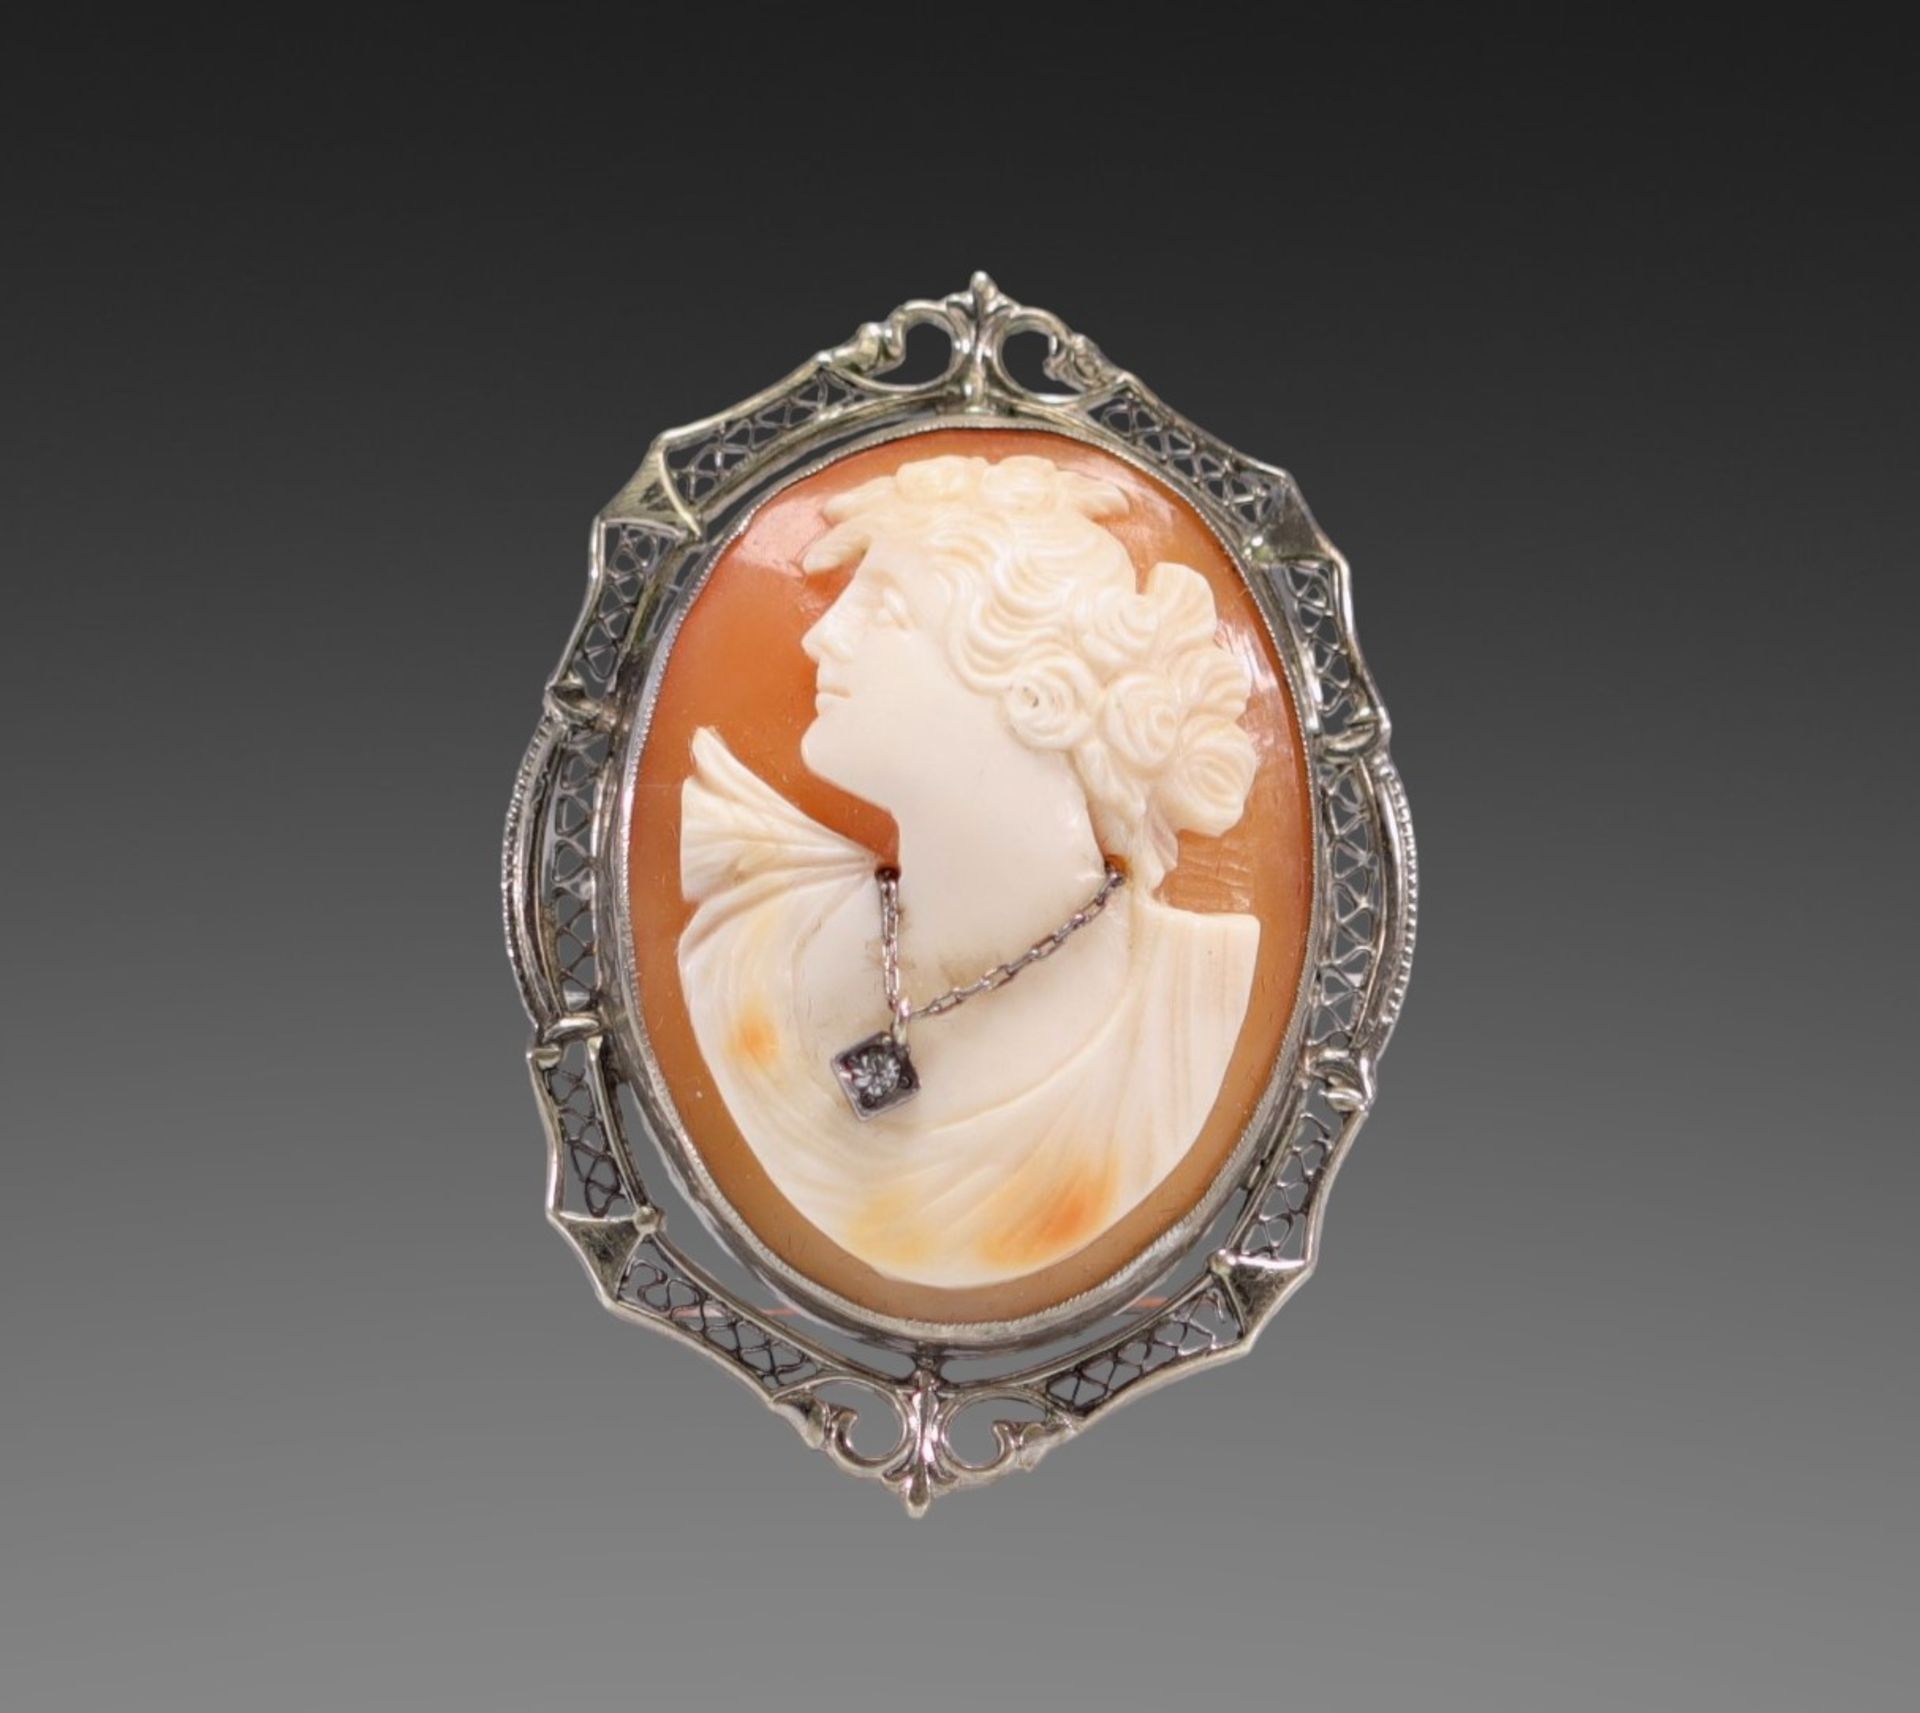 14k white gold brooch set with a cameo representing a woman in profile in bloom, with a genuine diam - Image 2 of 2